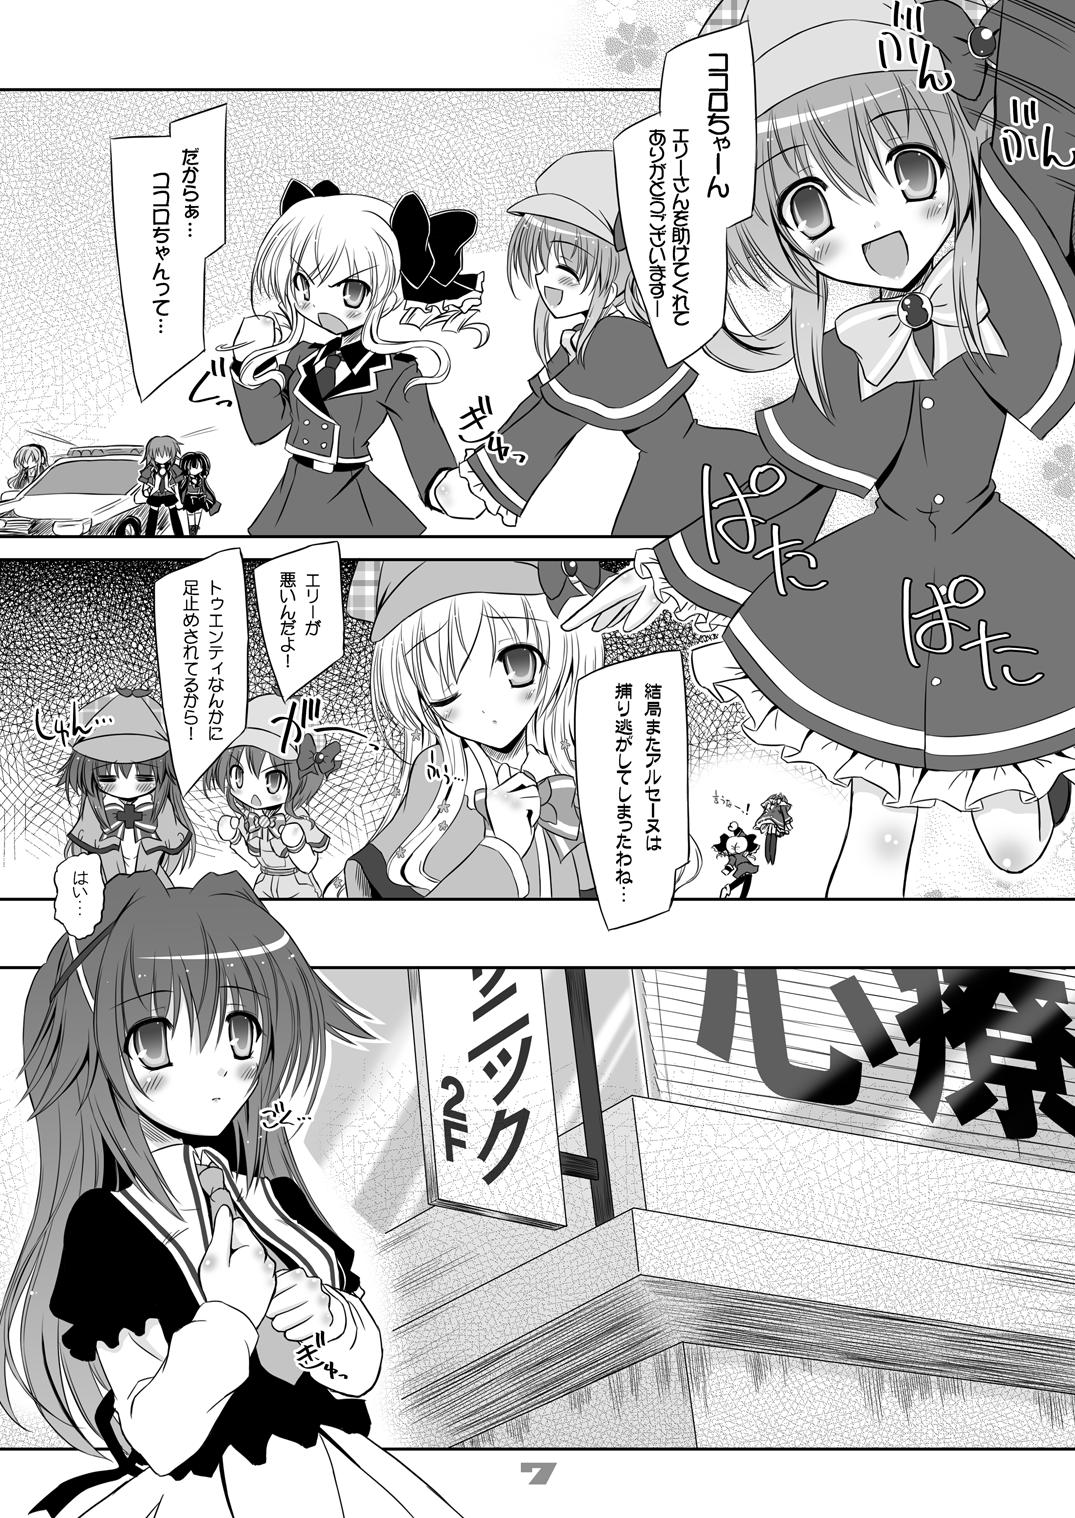 Party Chocolate Box - Tantei opera milky holmes Stepdaughter - Page 7